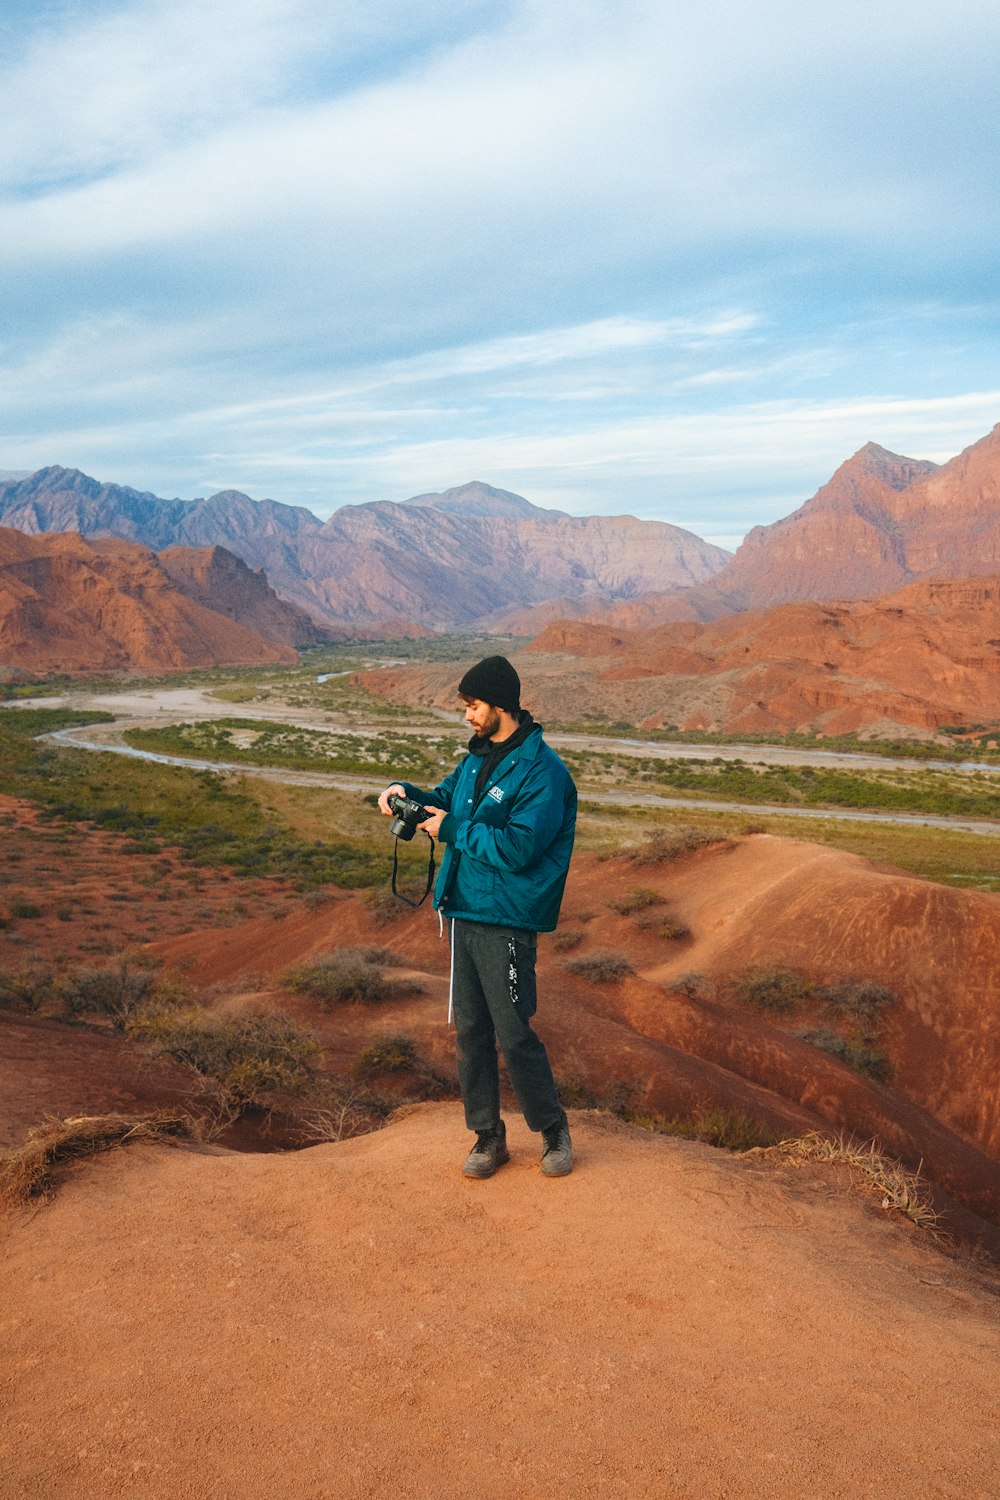 a man standing on a dirt road with mountains in the background